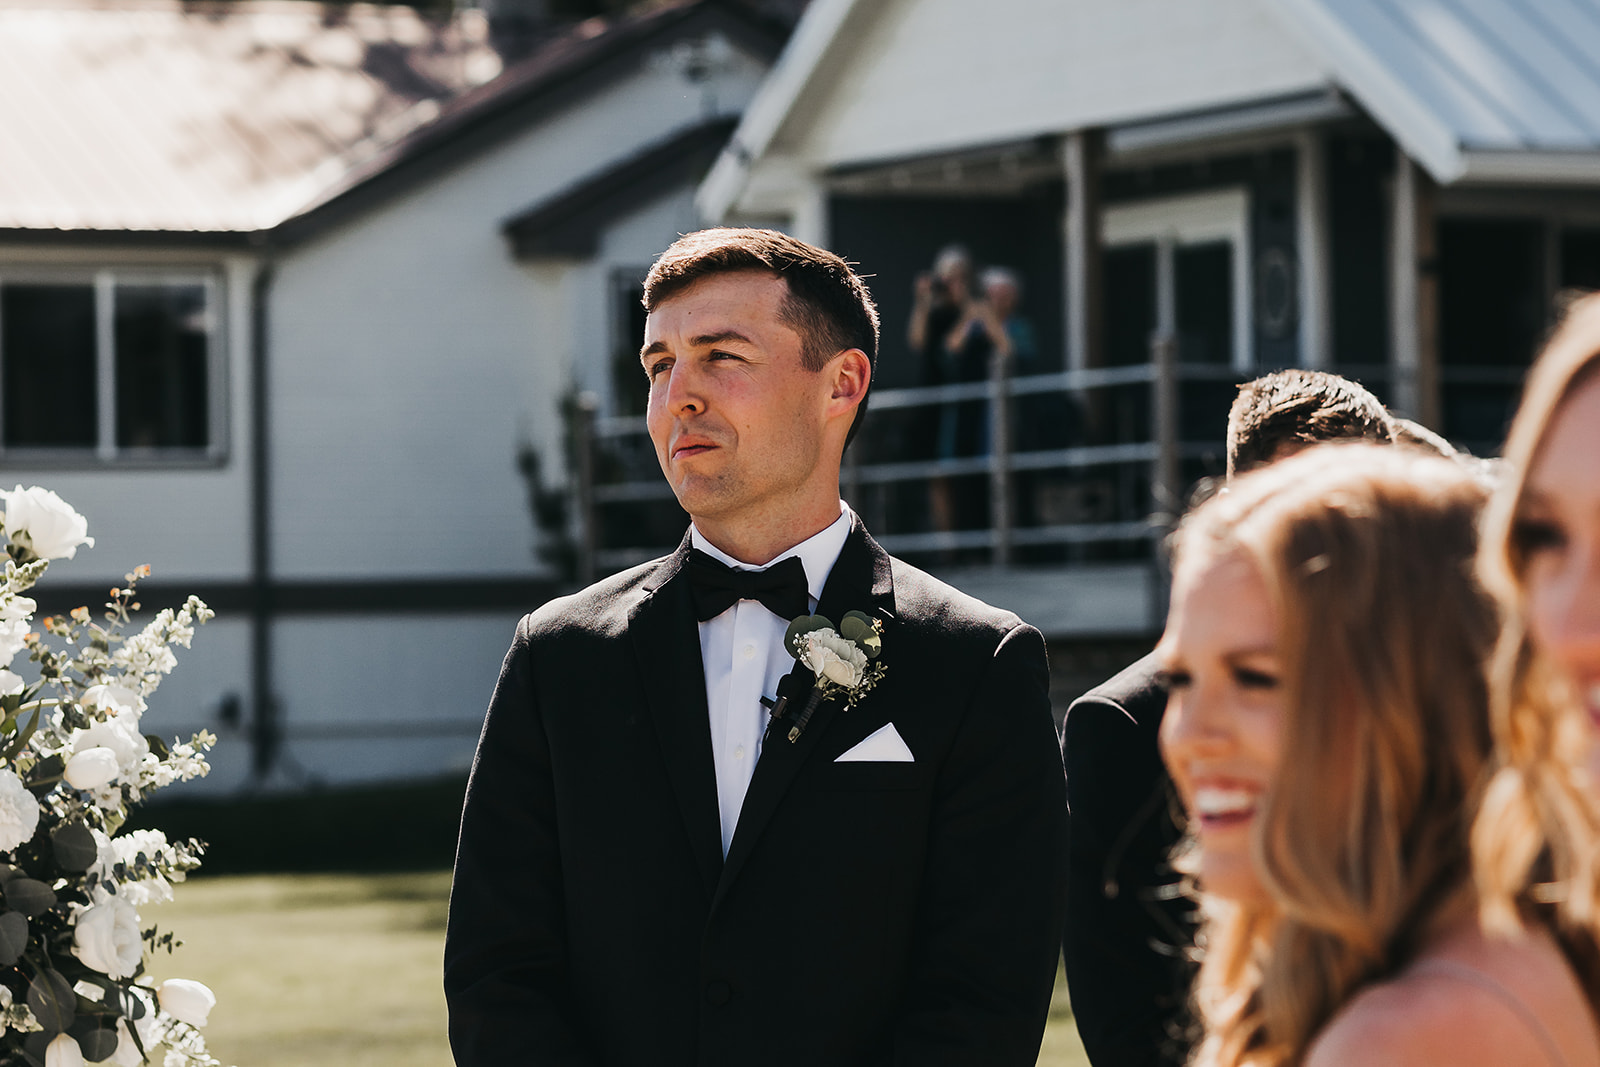 Groom getting emotional at bride walking down the aisle at private lake house wedding. 